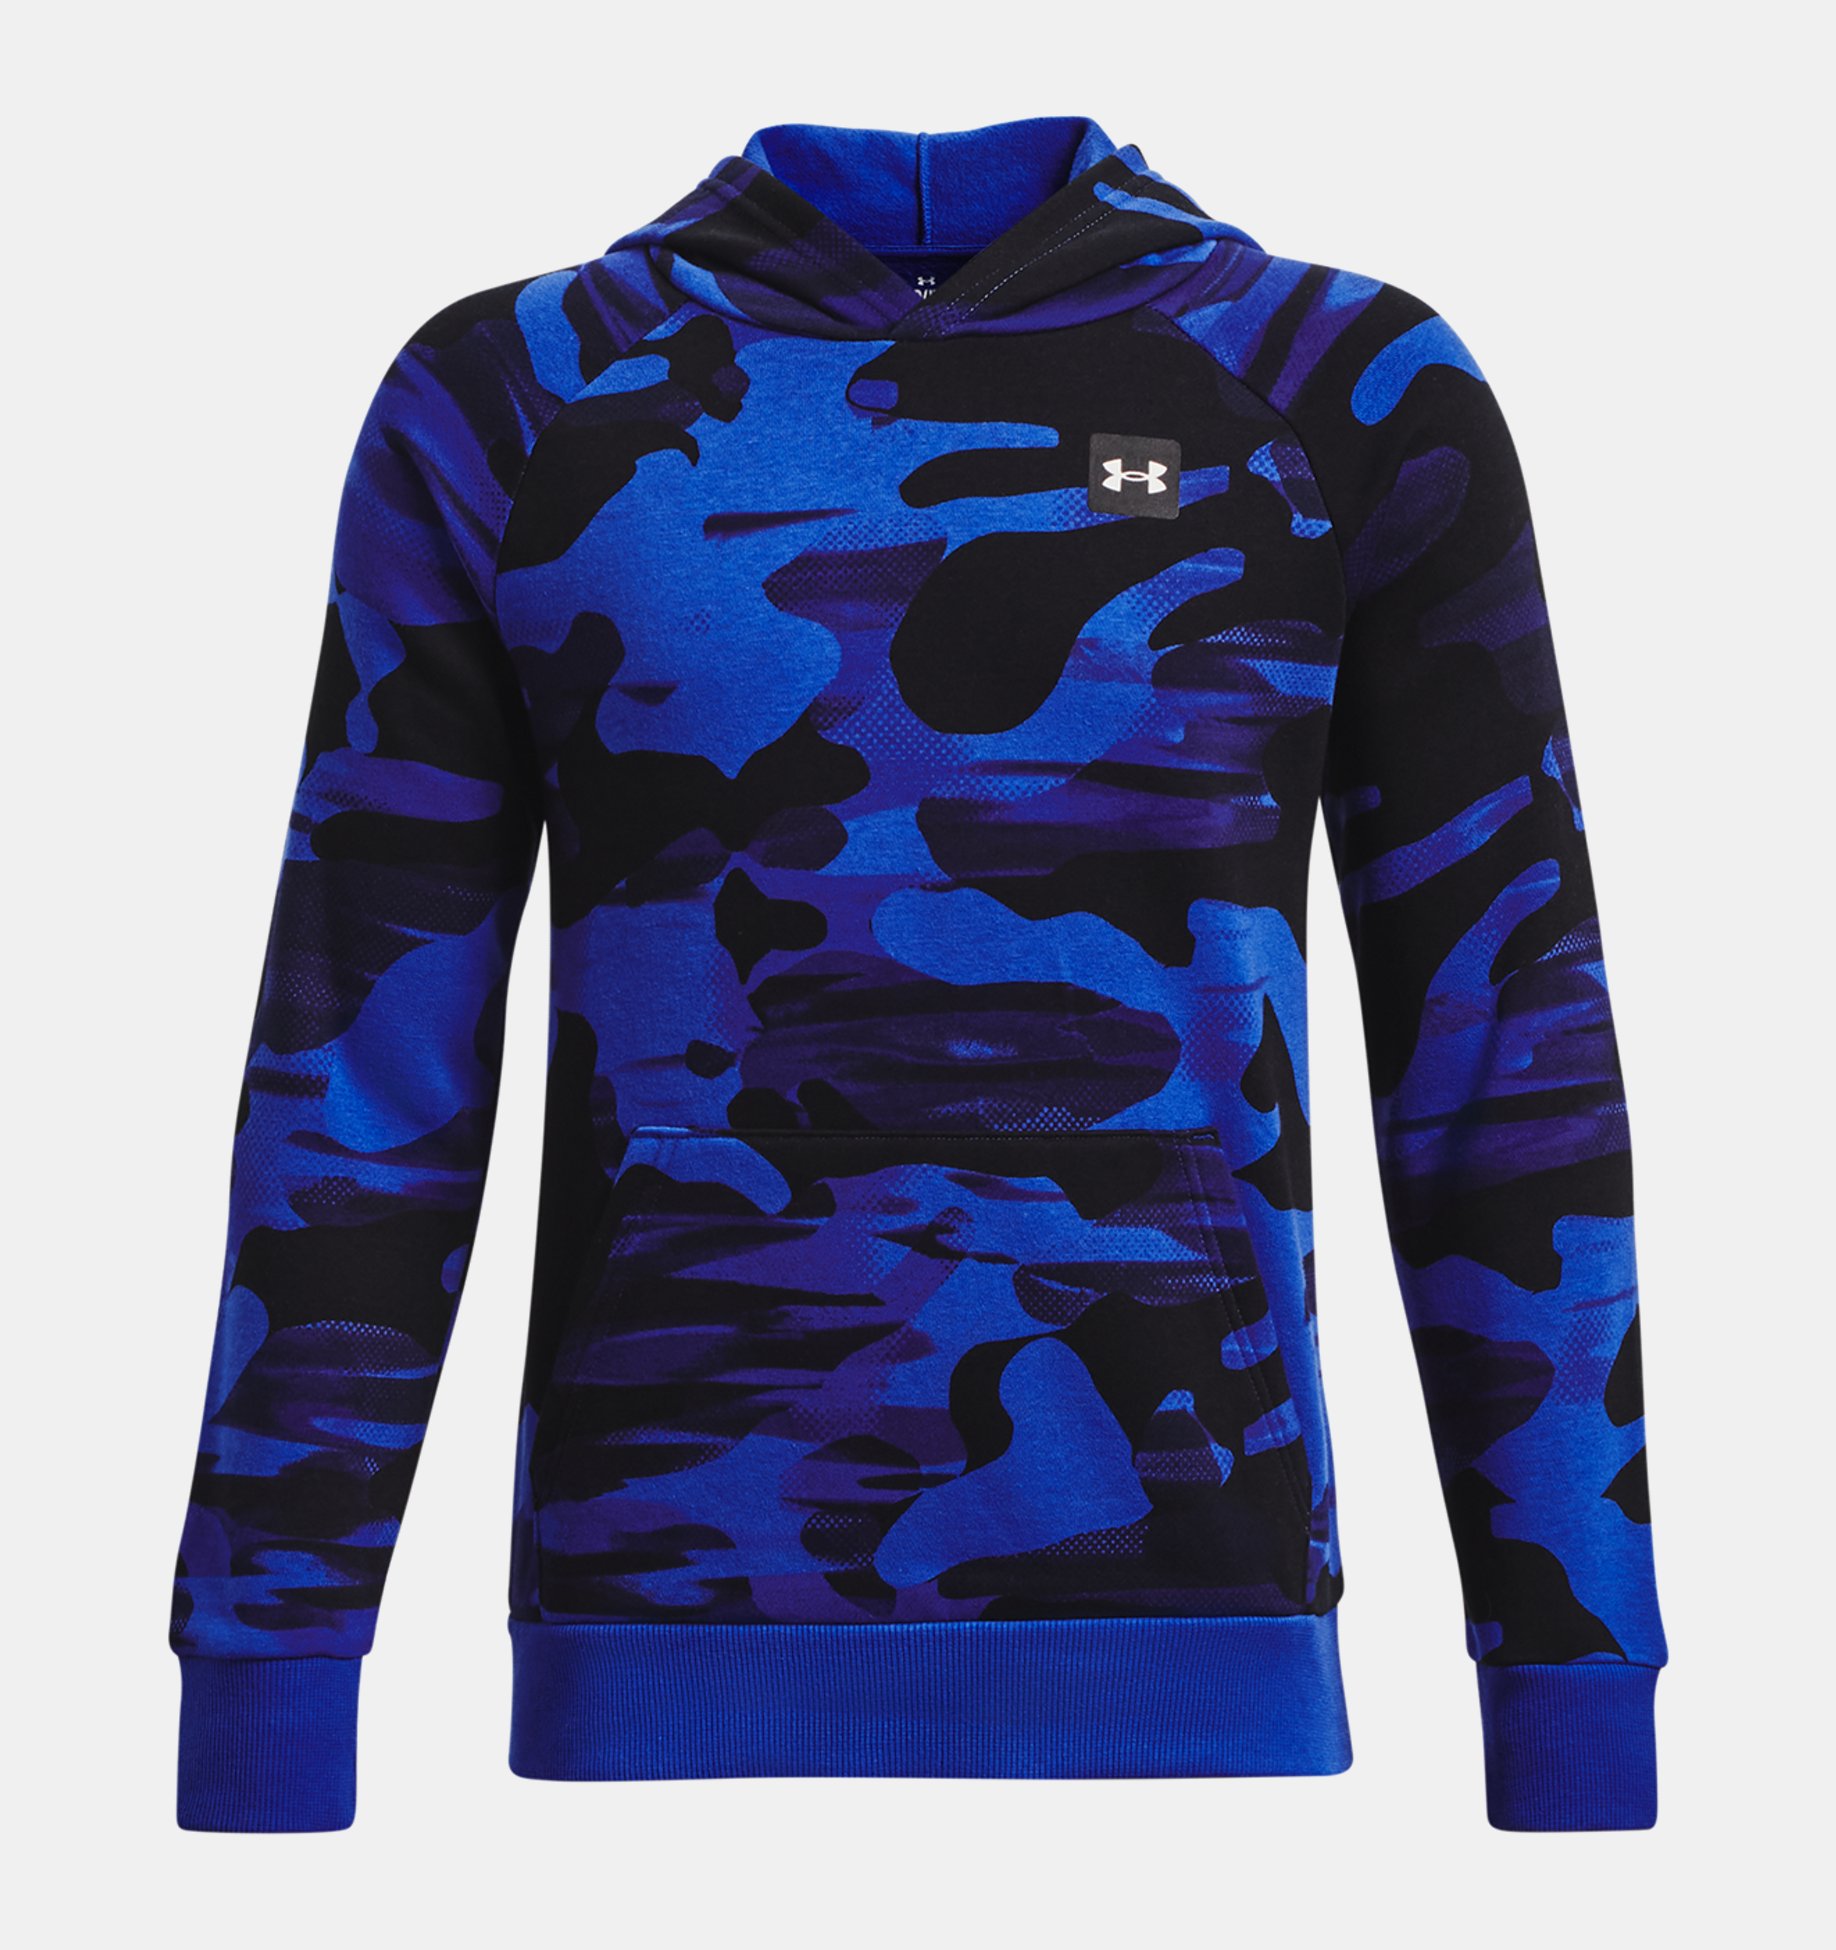 Under Armour Outlet Sale: Up to 50% off + extra 40% off on Select Styles